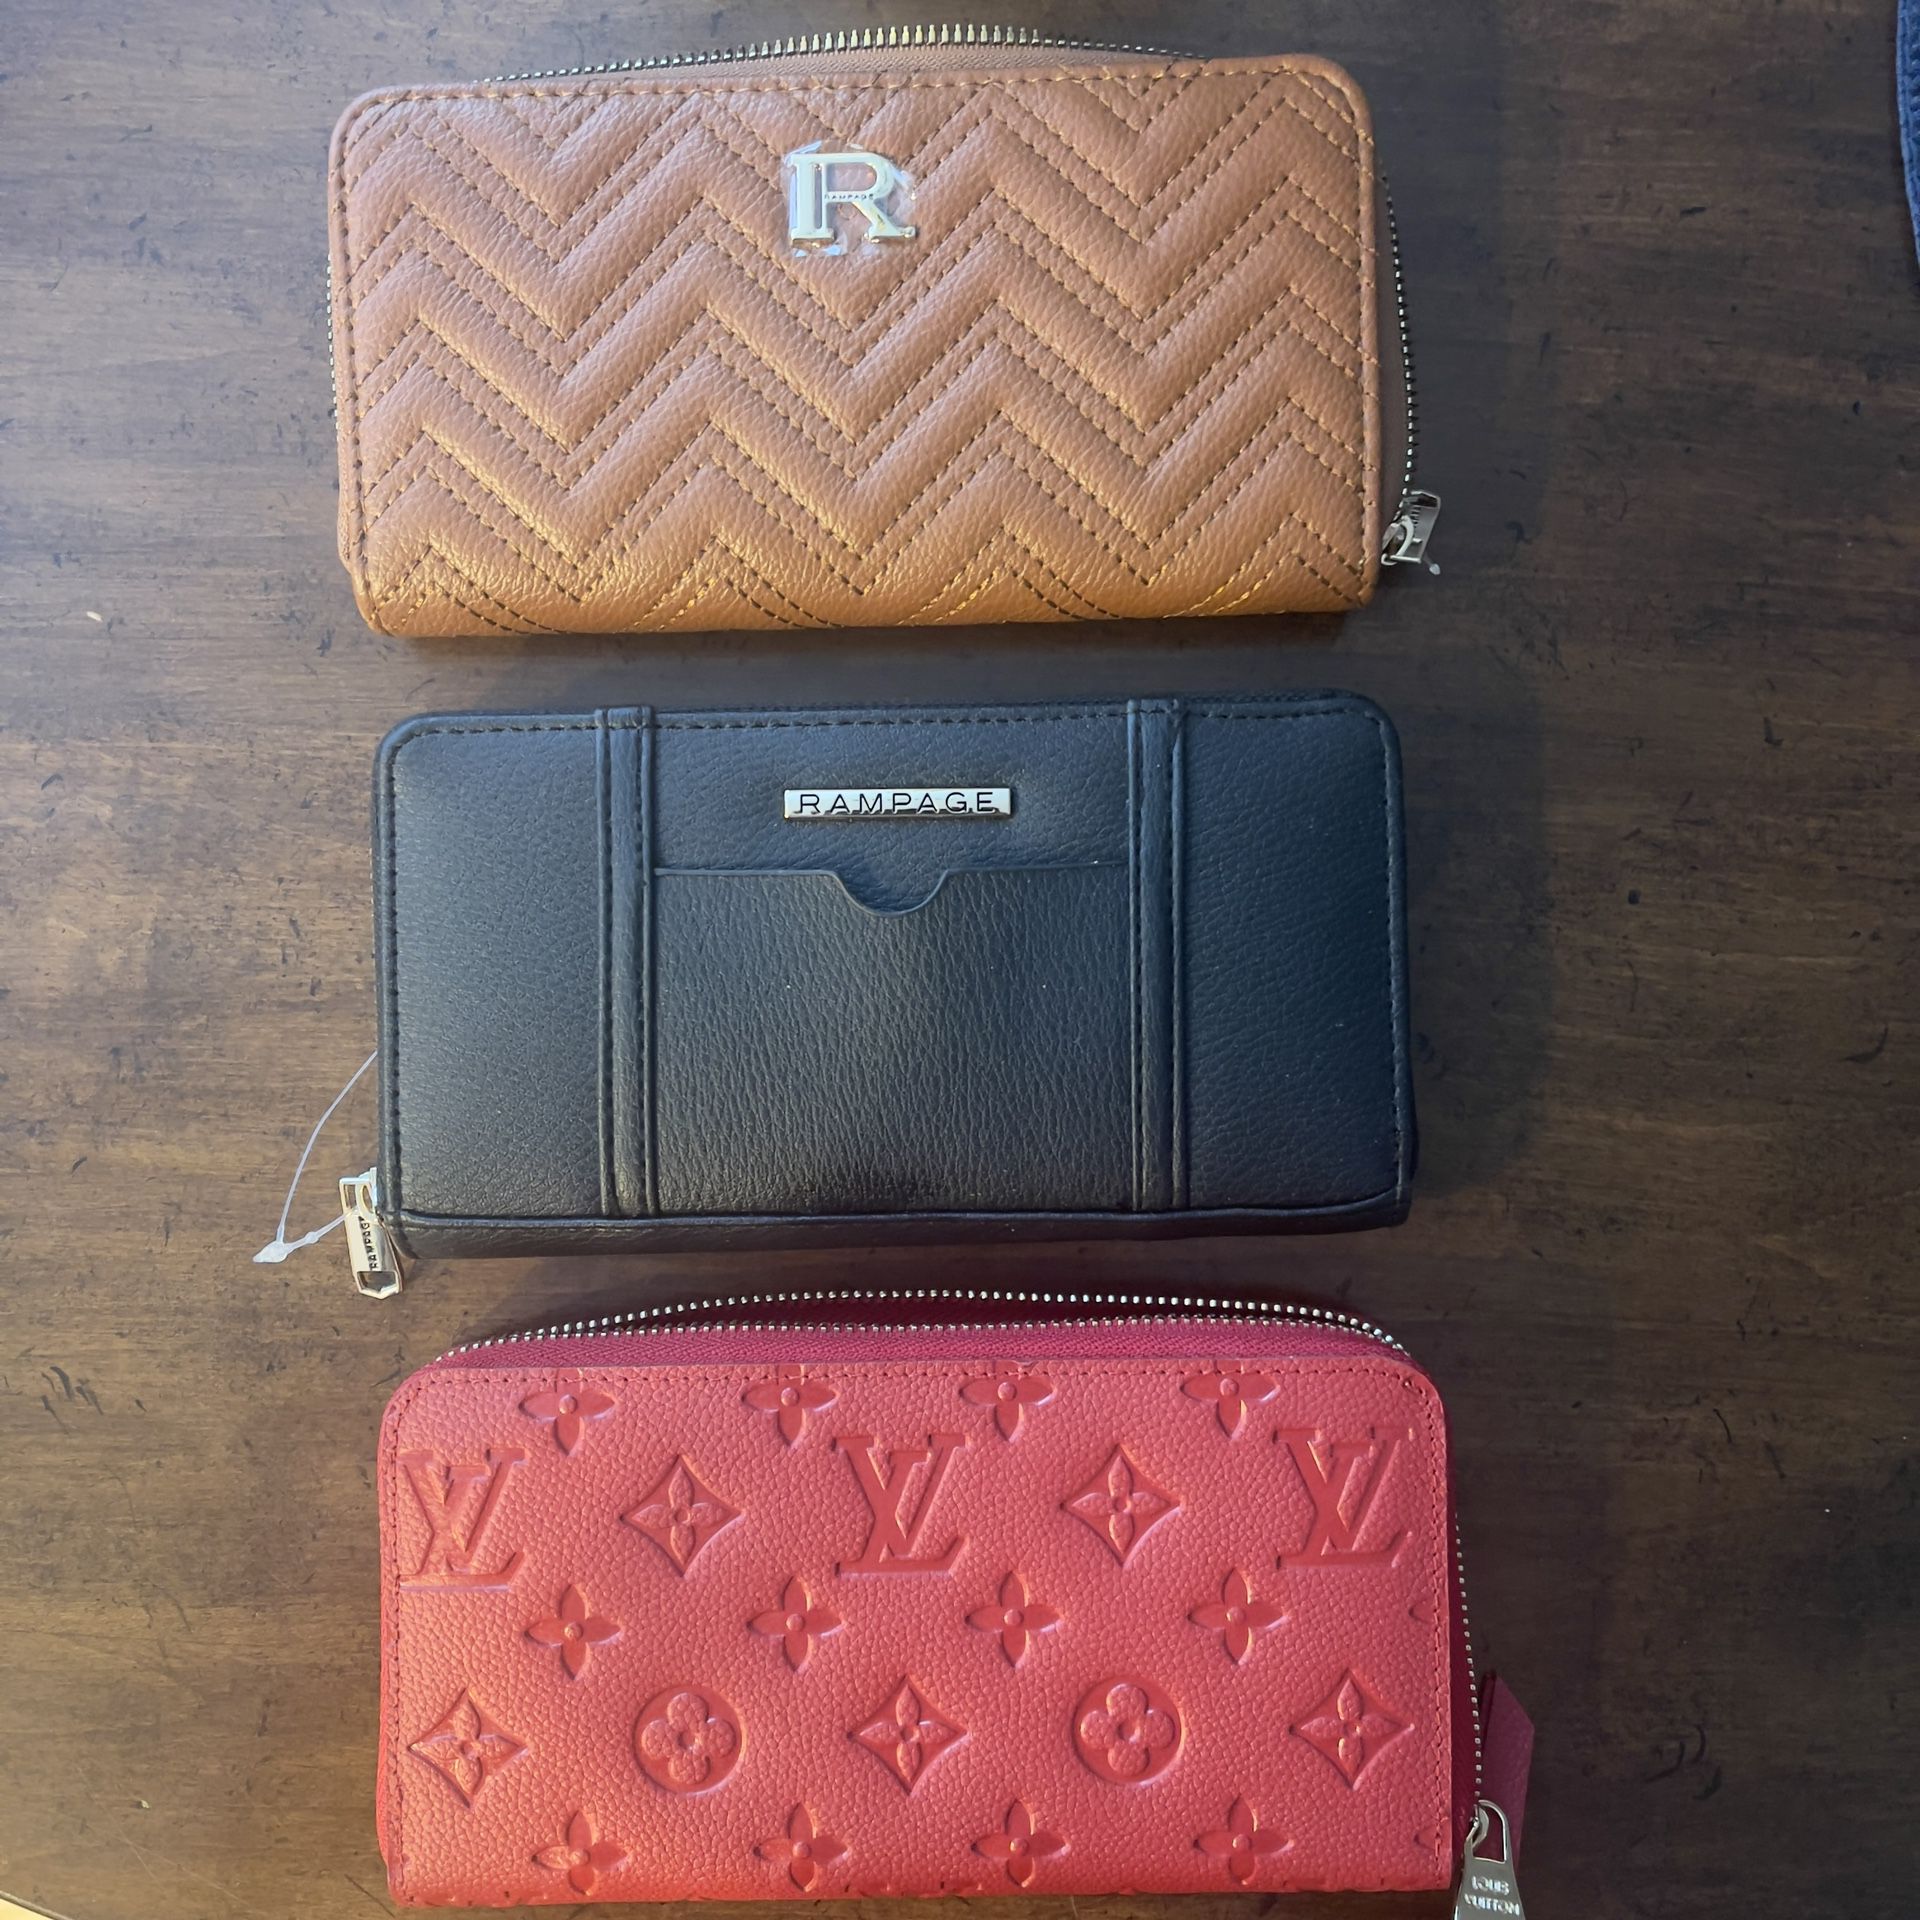 Brand New Wallets -Selling As A Lot Of 3 For $50